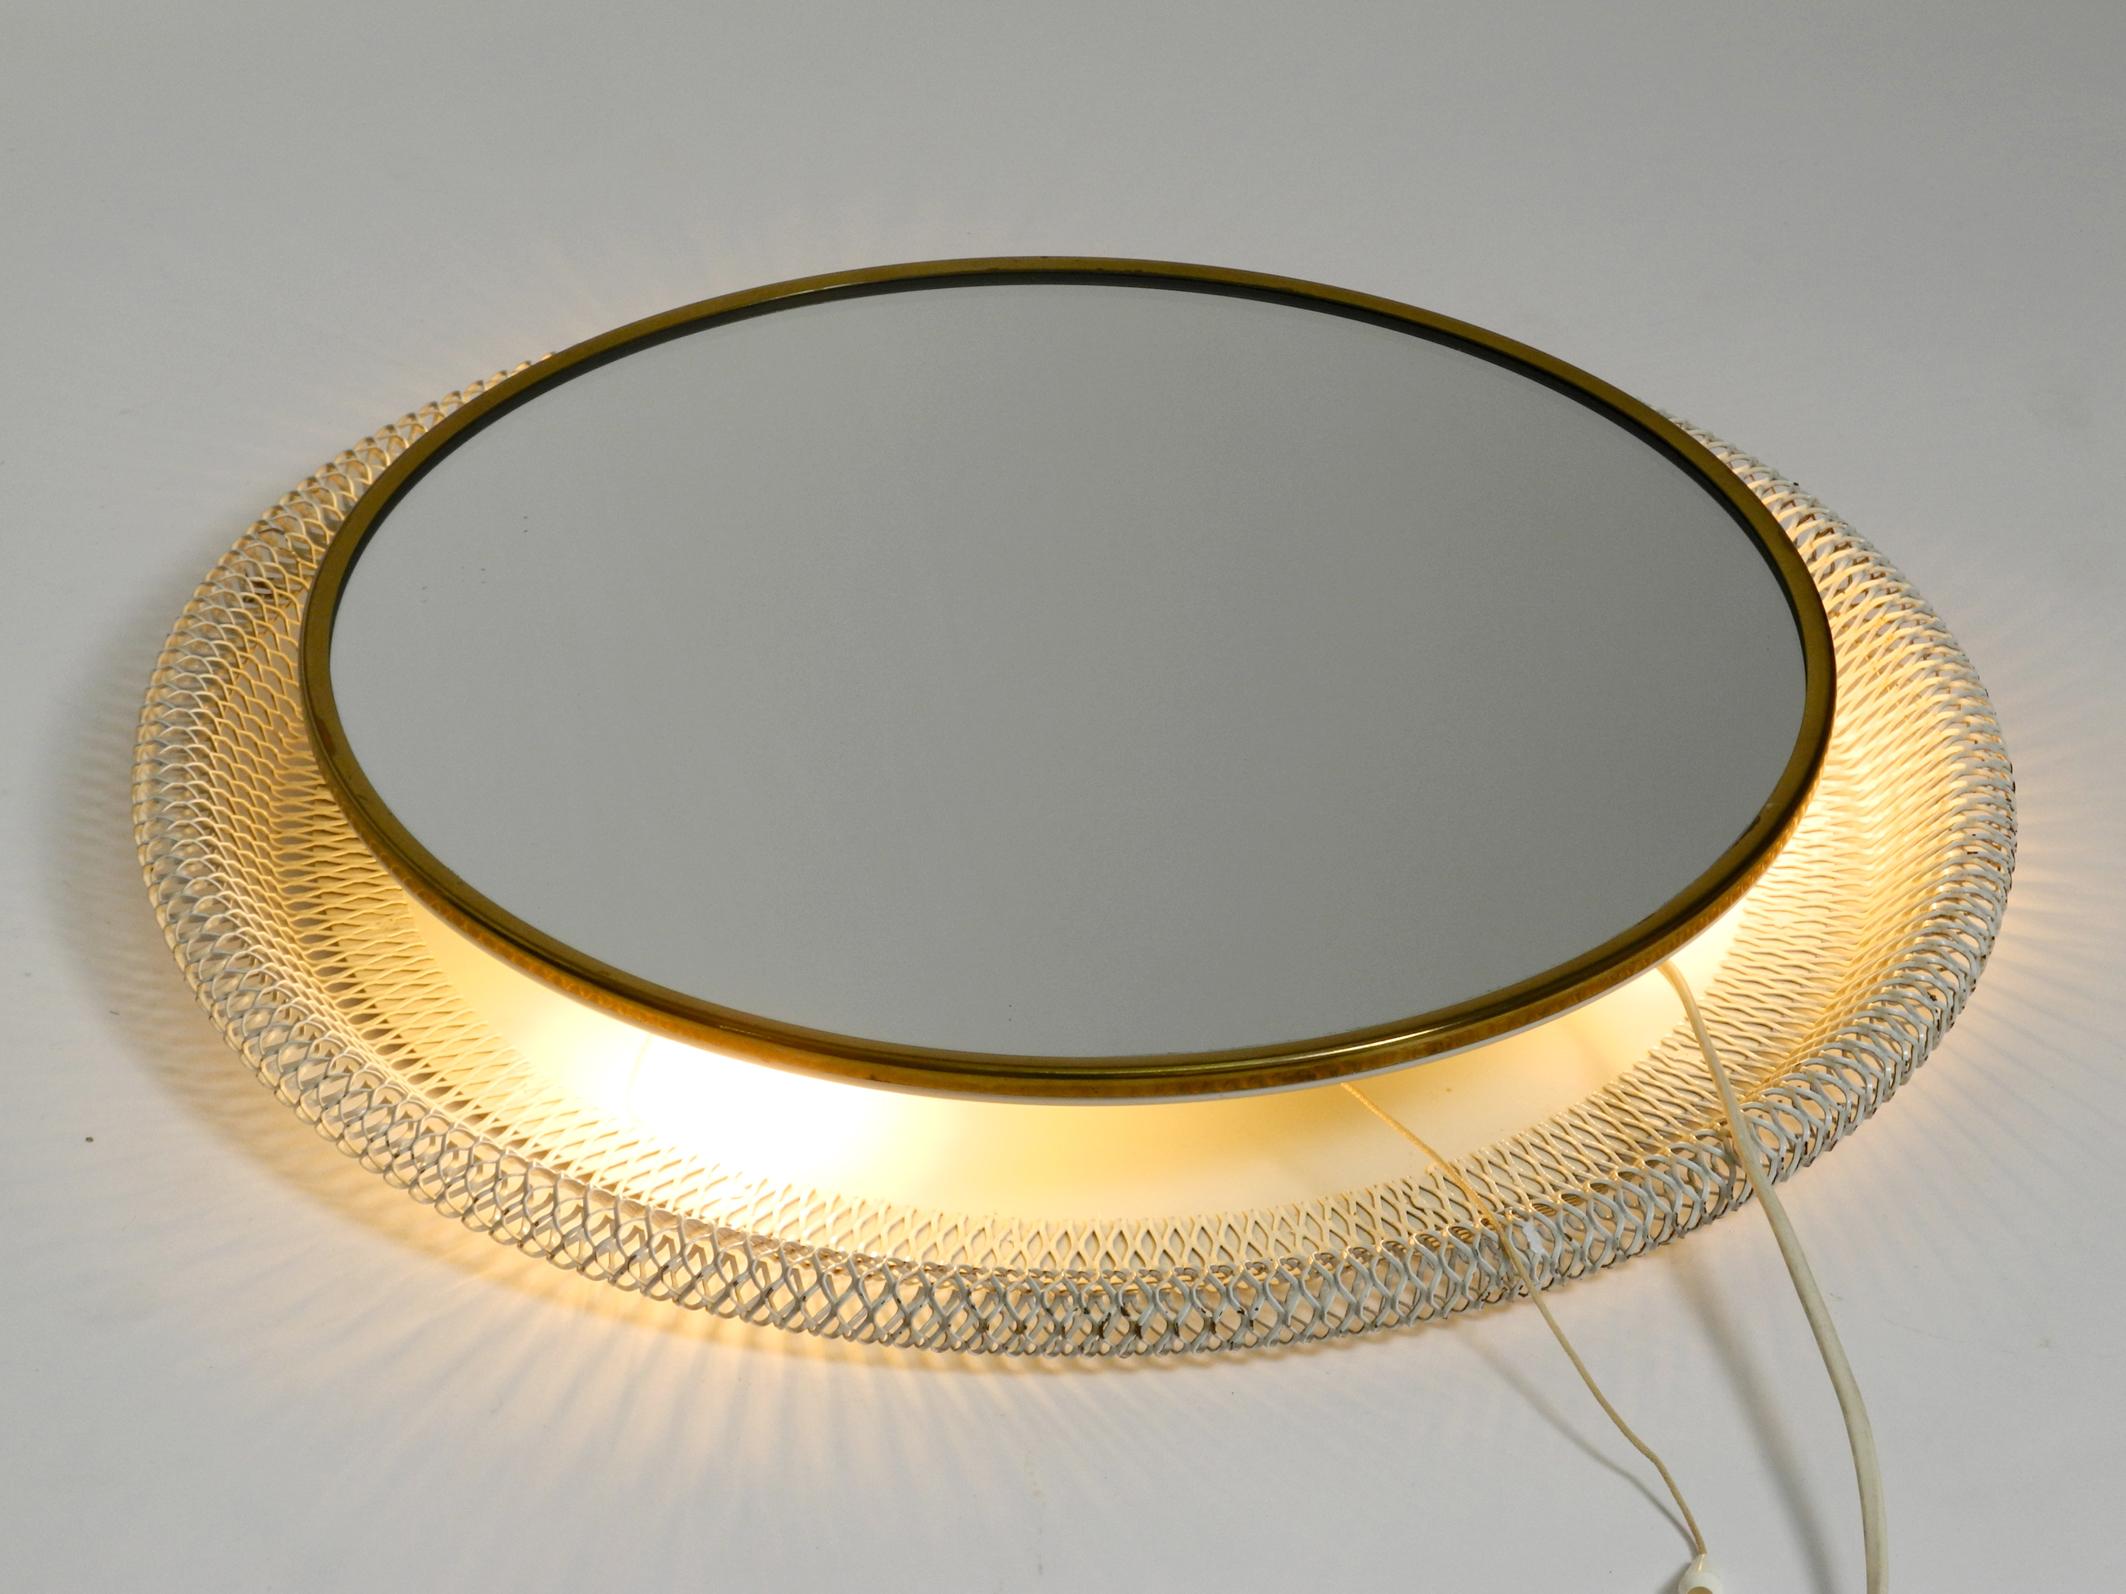 Illuminated Mid-Century Modern Round Wall Mirror with White Expanded Metal Frame For Sale 3